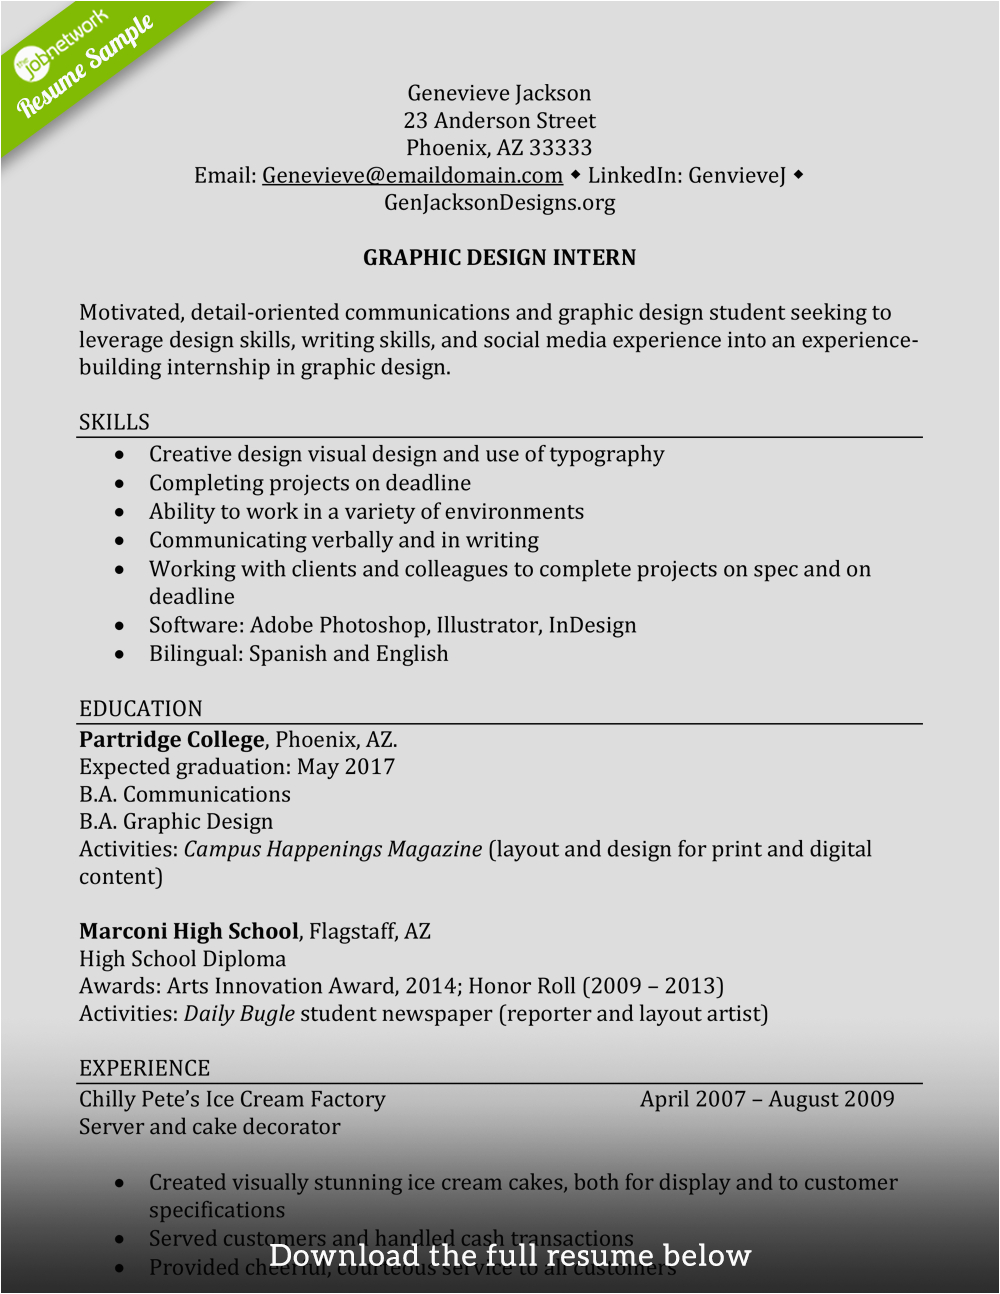 Sample Resume for Internship with No Experience How to Write Resume for Internship with No Experience